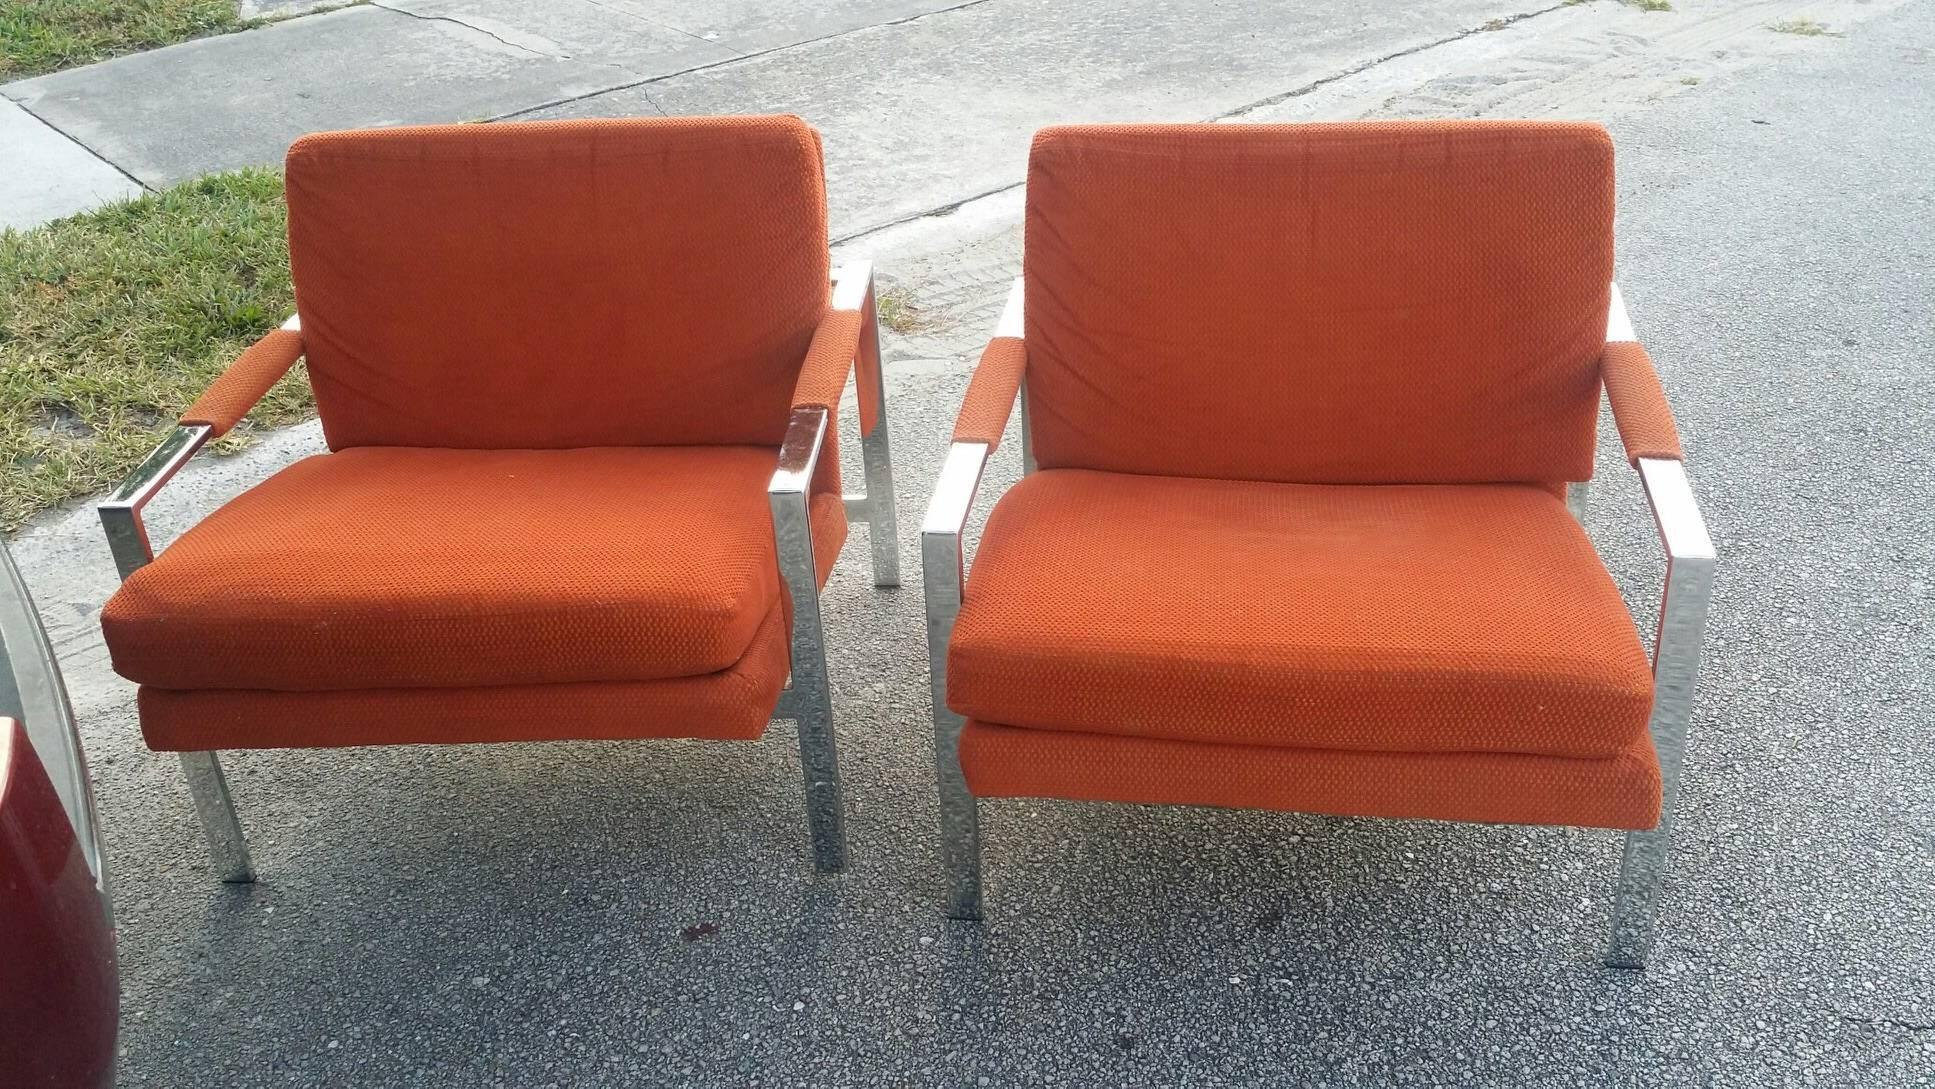 Pair of vintage Hollywood Palm Beach Regency orange fabric, chrome cube flat bar, armchairs by Carson's Furniture (tagged). Original upholstery in good condition with one zipper on the back of cushion needing replacement. In the manner of Milo